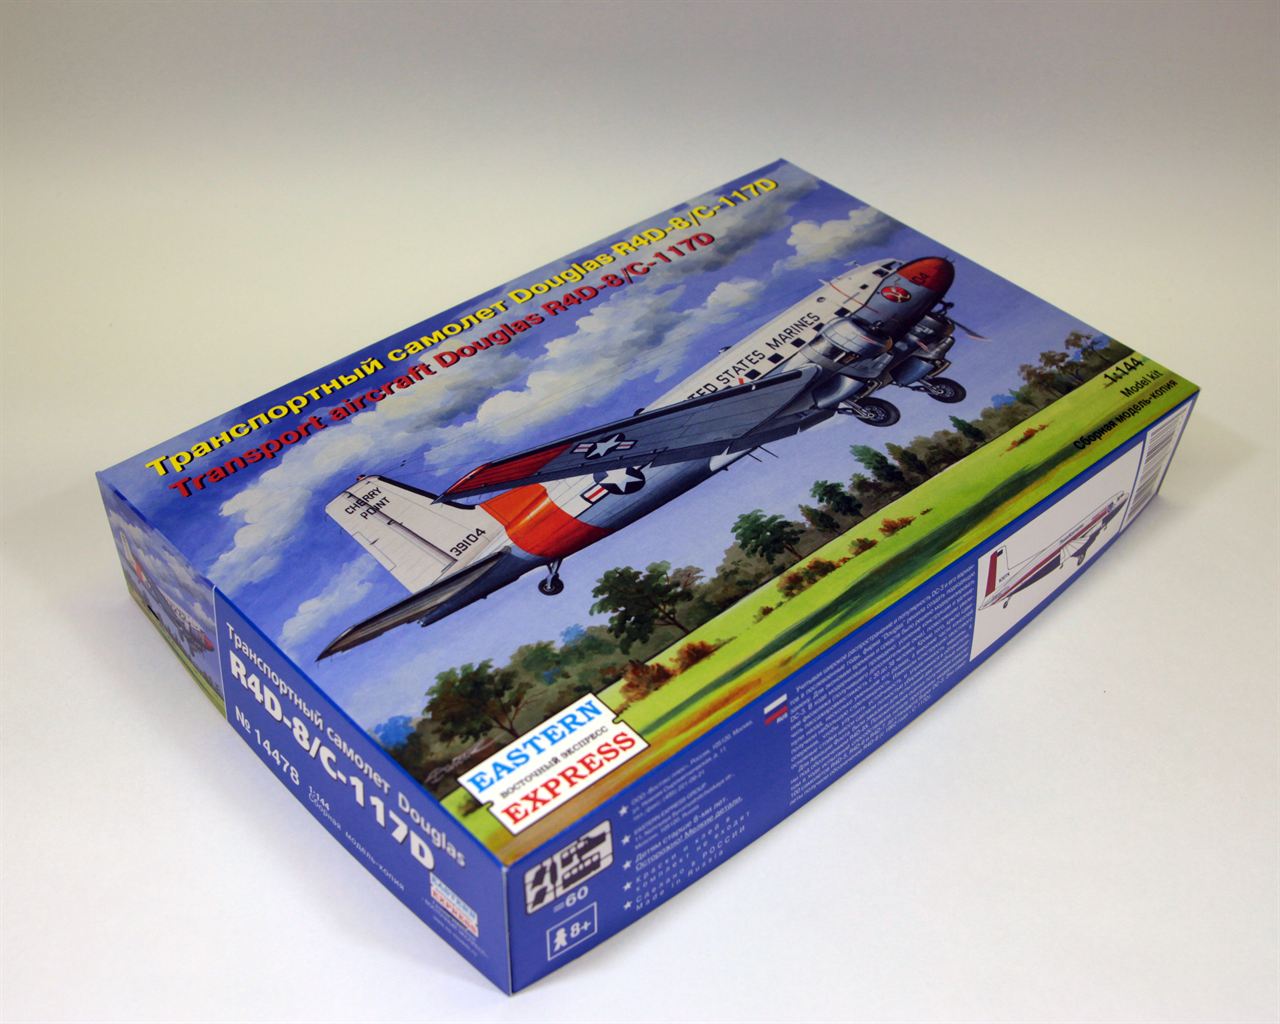 Eastern Express 1/144 Aircraft Doulgas R4D-8/C-117D EE14478 